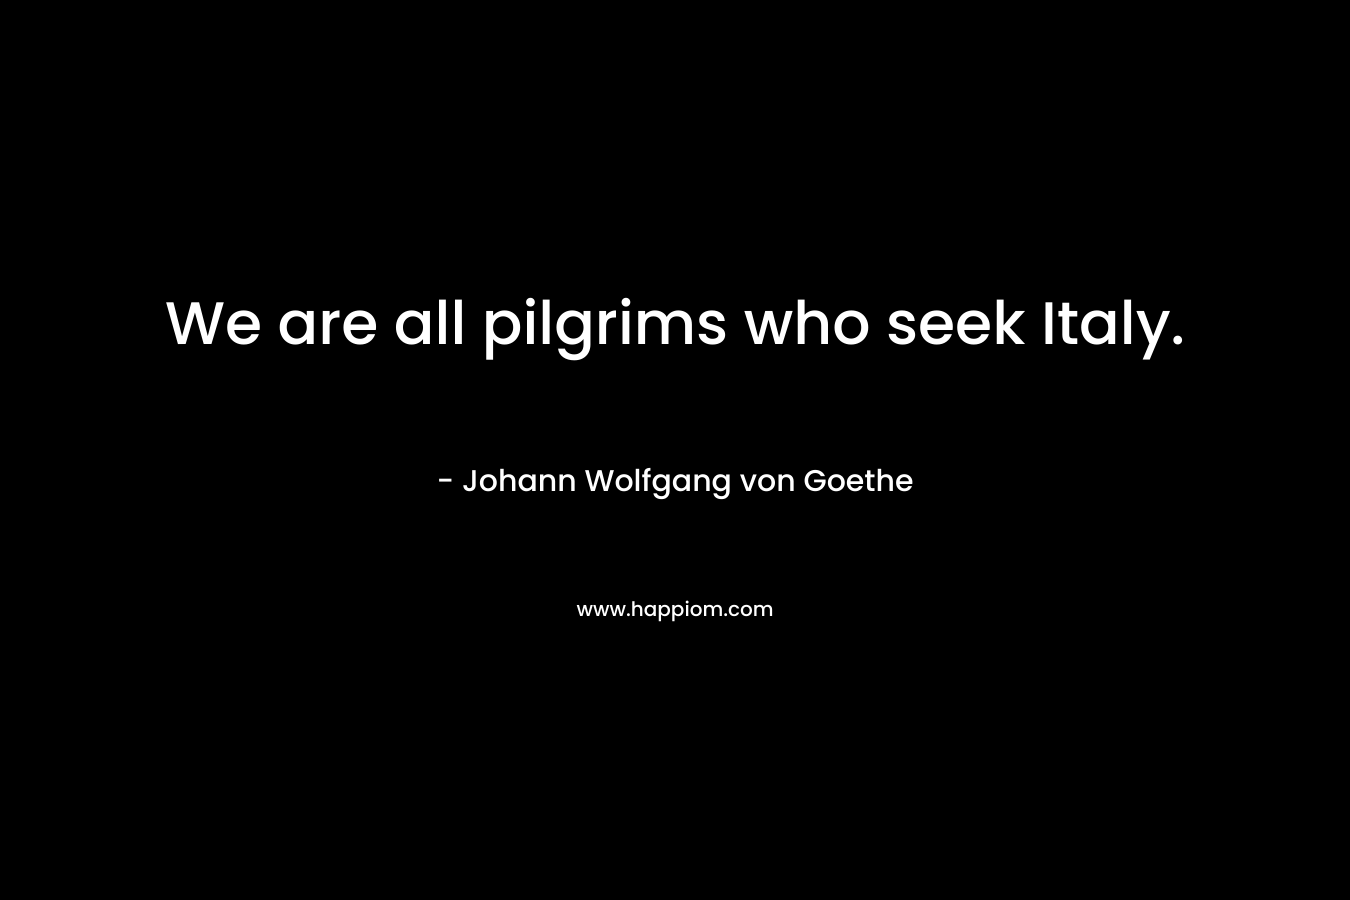 We are all pilgrims who seek Italy.